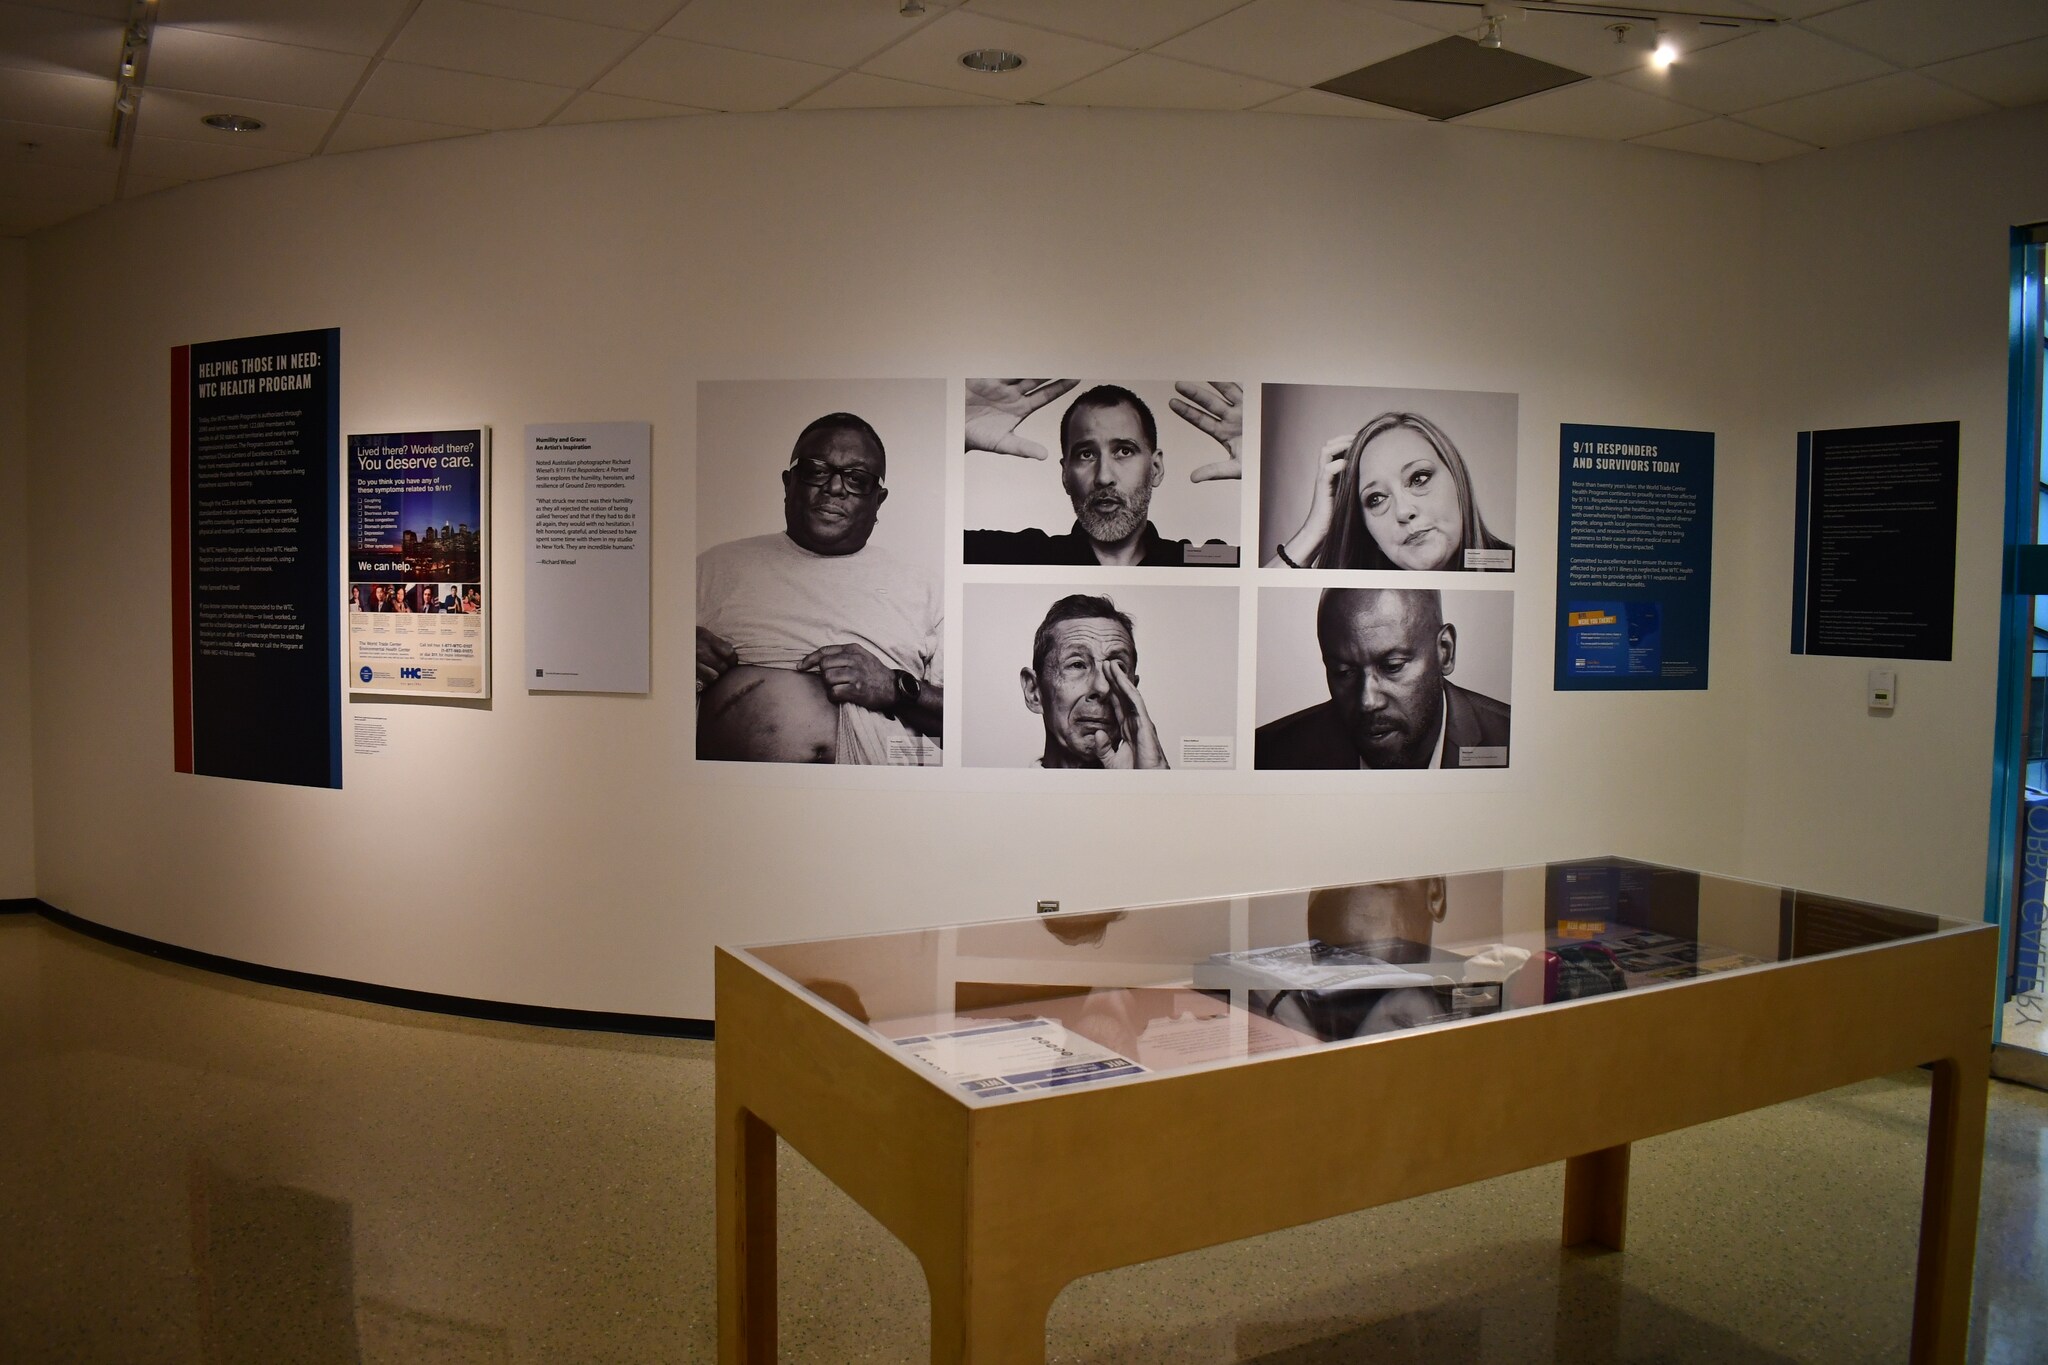 A wall displaying various artifacts and images of survivors from the Health Effects of 9/11 Exhibition.